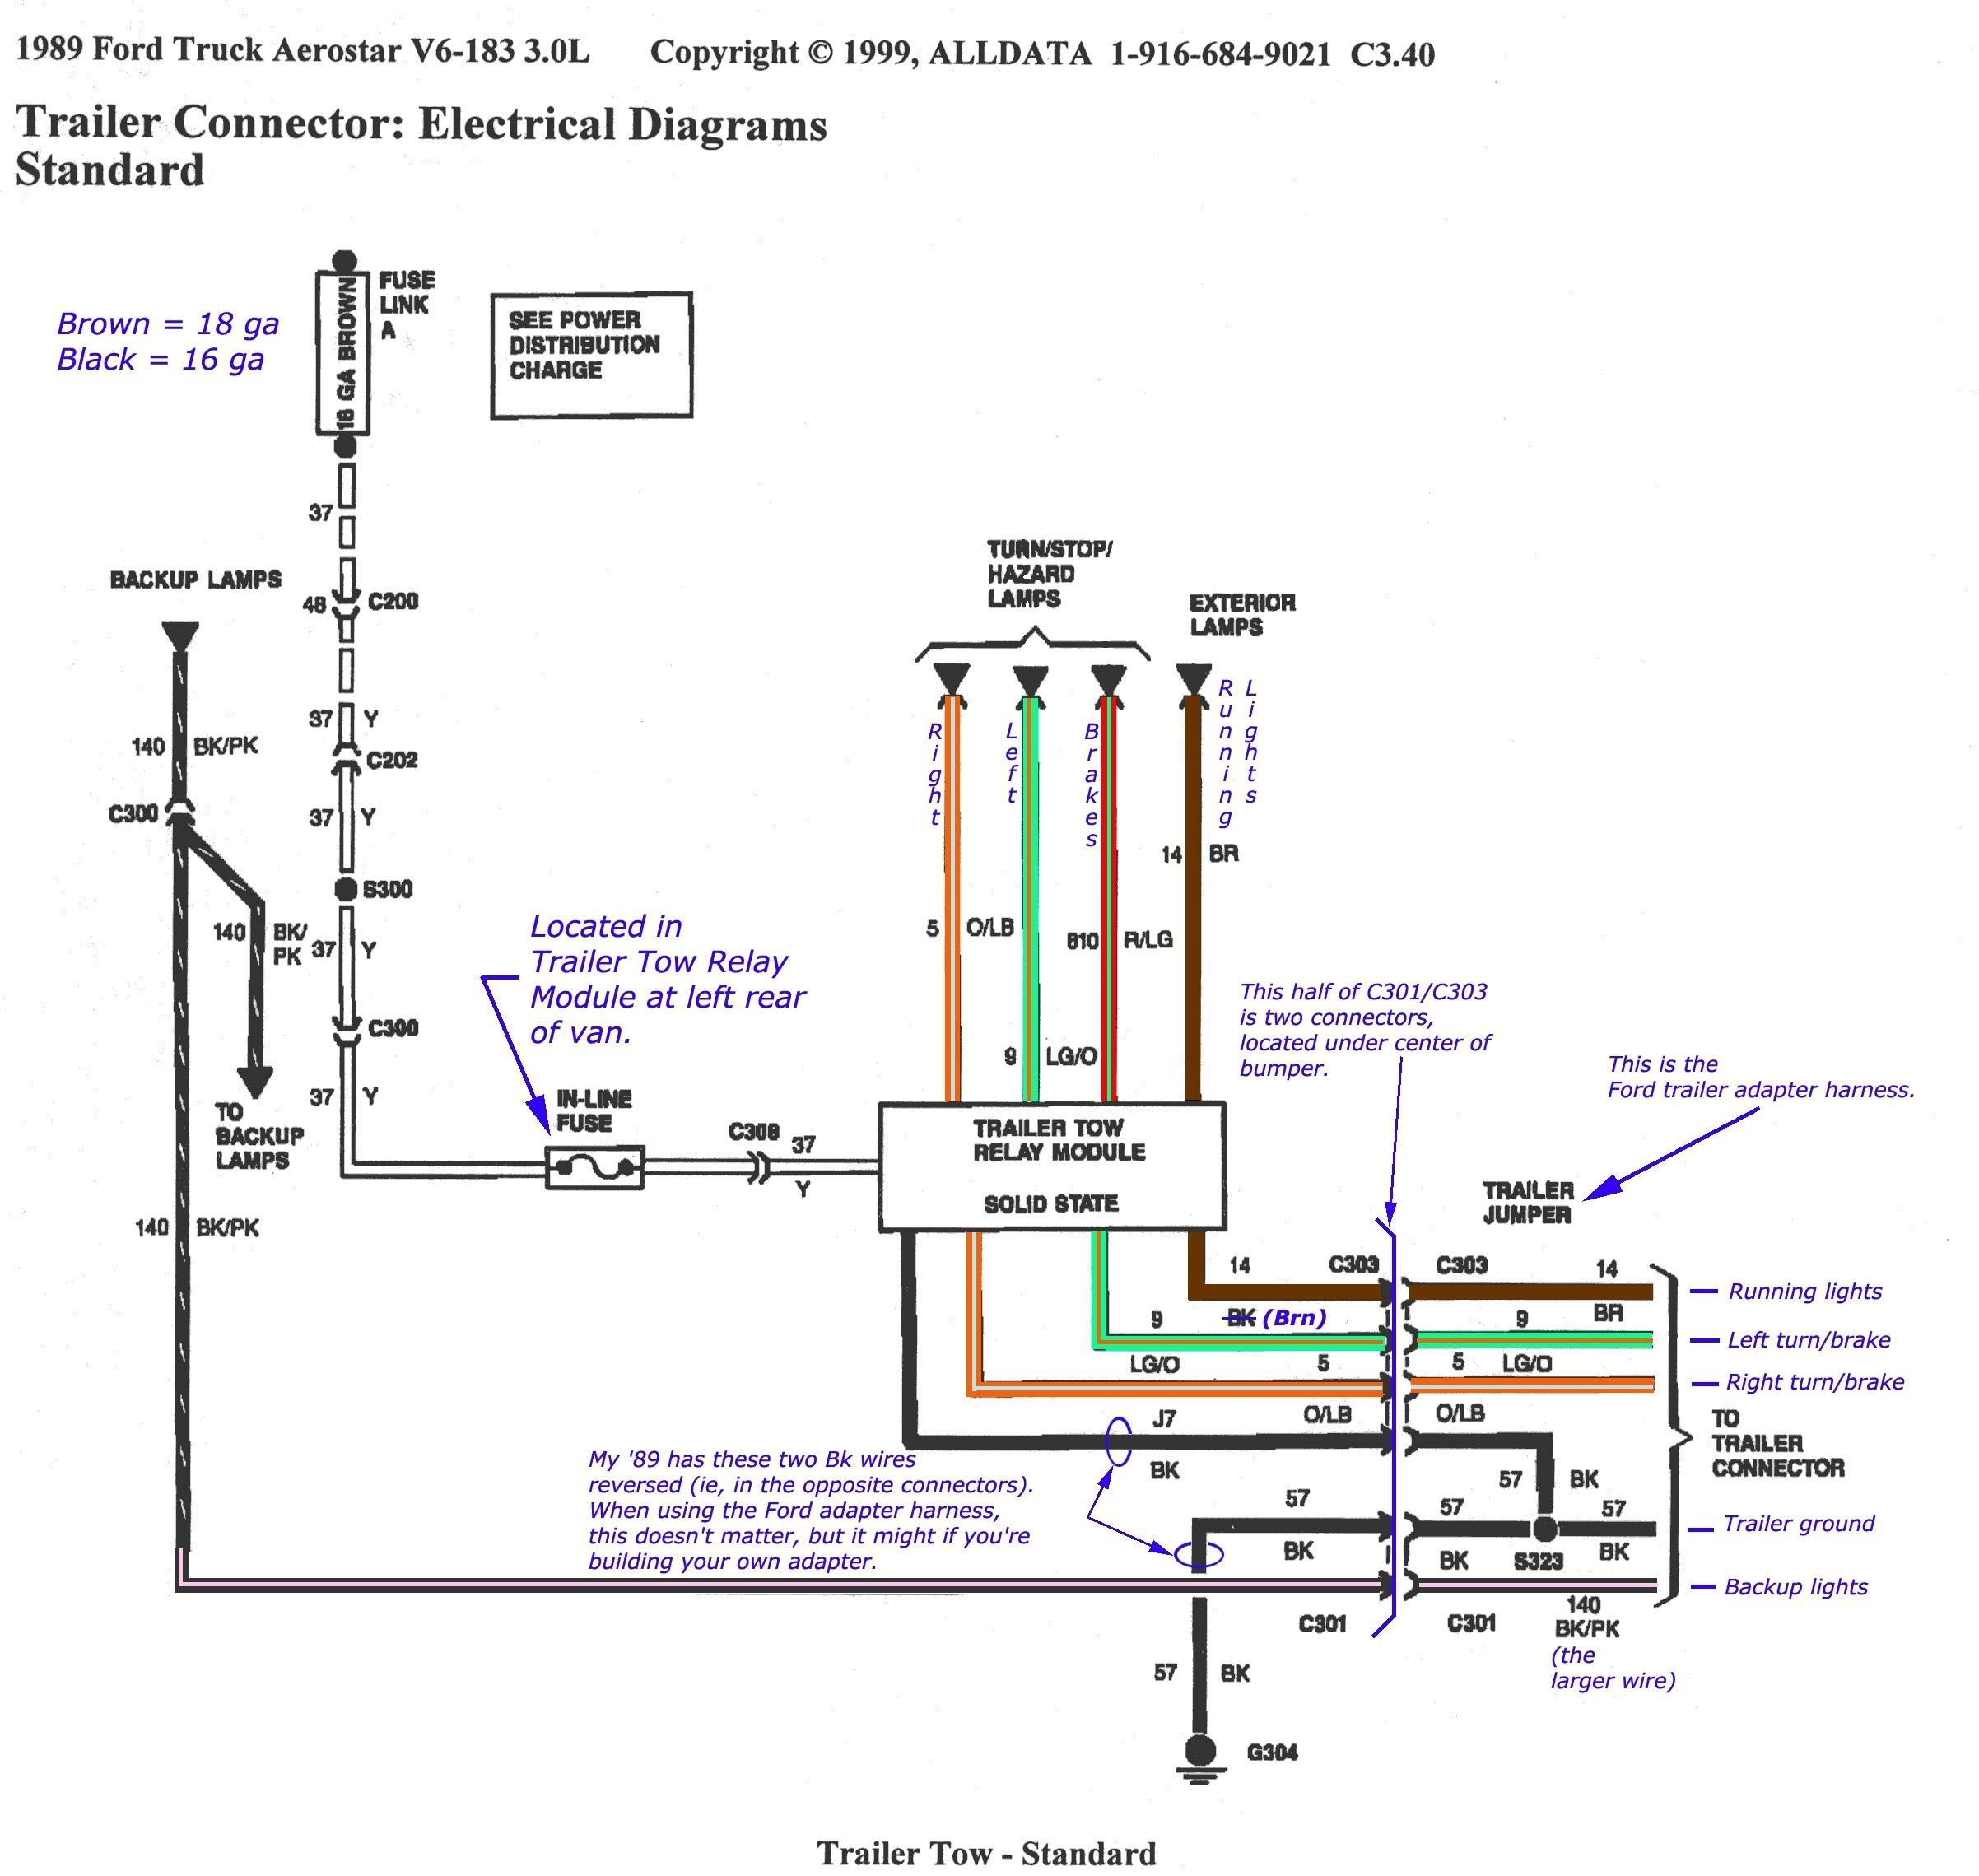 Golf 4 Abs Wiring Diagram Perfect Wiring Diagram For Wabco Abs Best - Wabco Abs Wiring Diagram